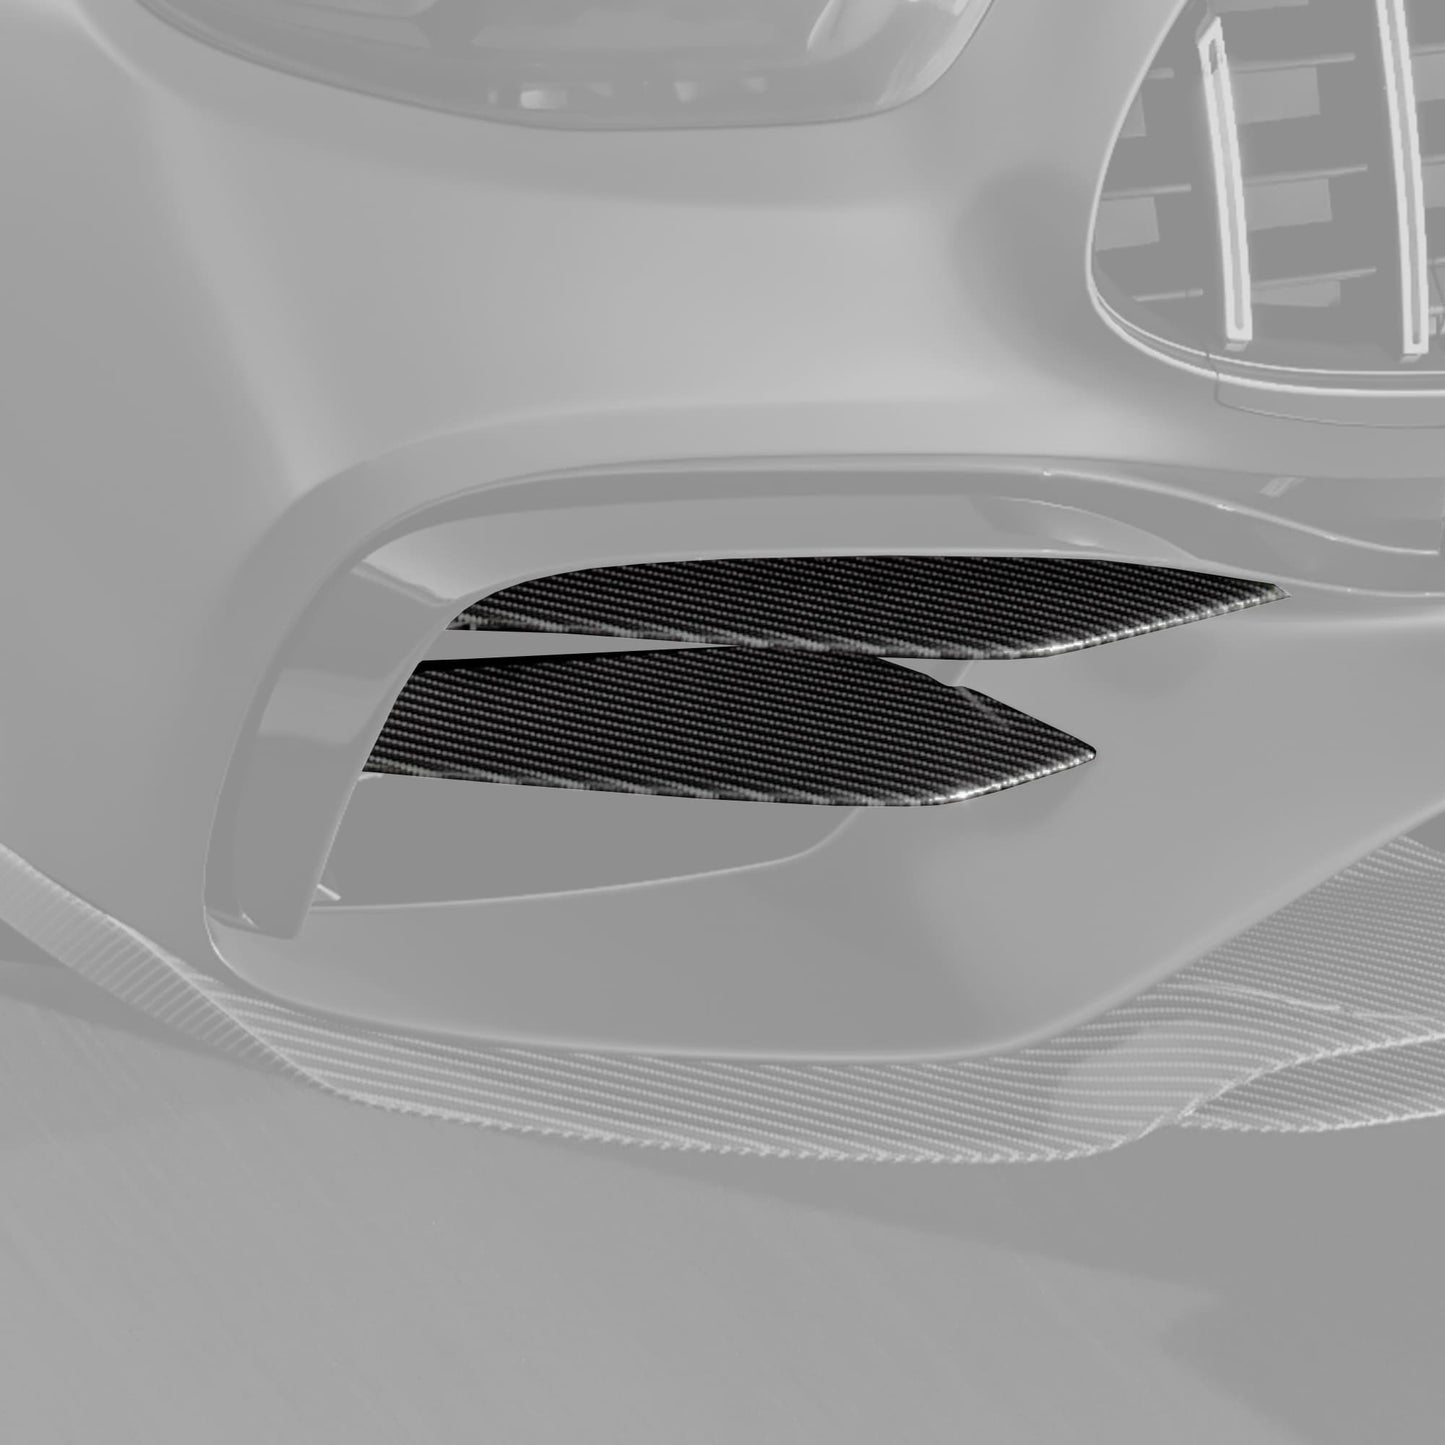 MANHART CARBON FRONT BUMPER INSERTS FOR MERCEDES-AMG E 63 (S)